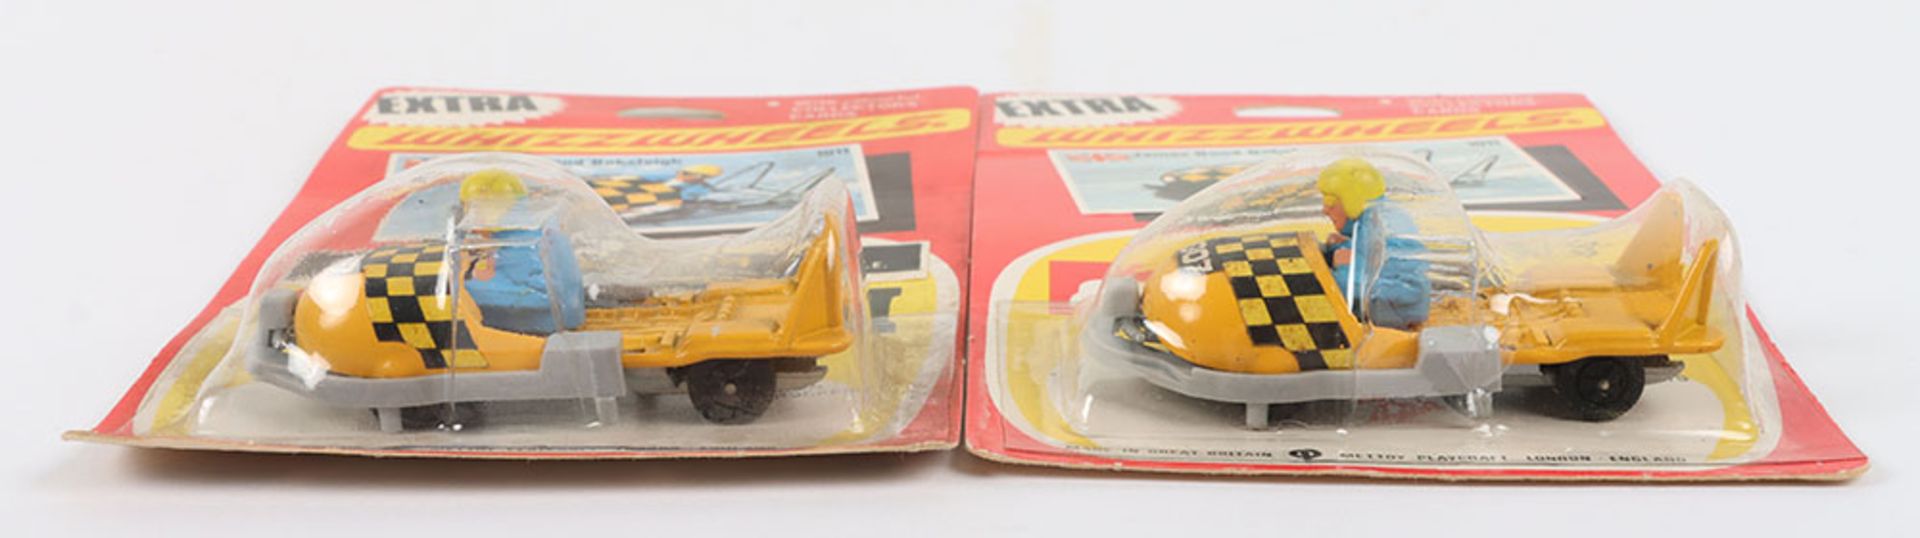 Two Scarce Extra Corgi Juniors 1011 Bobsleighs used by James Bond in his pursuit of the Chief of S.P - Image 8 of 10